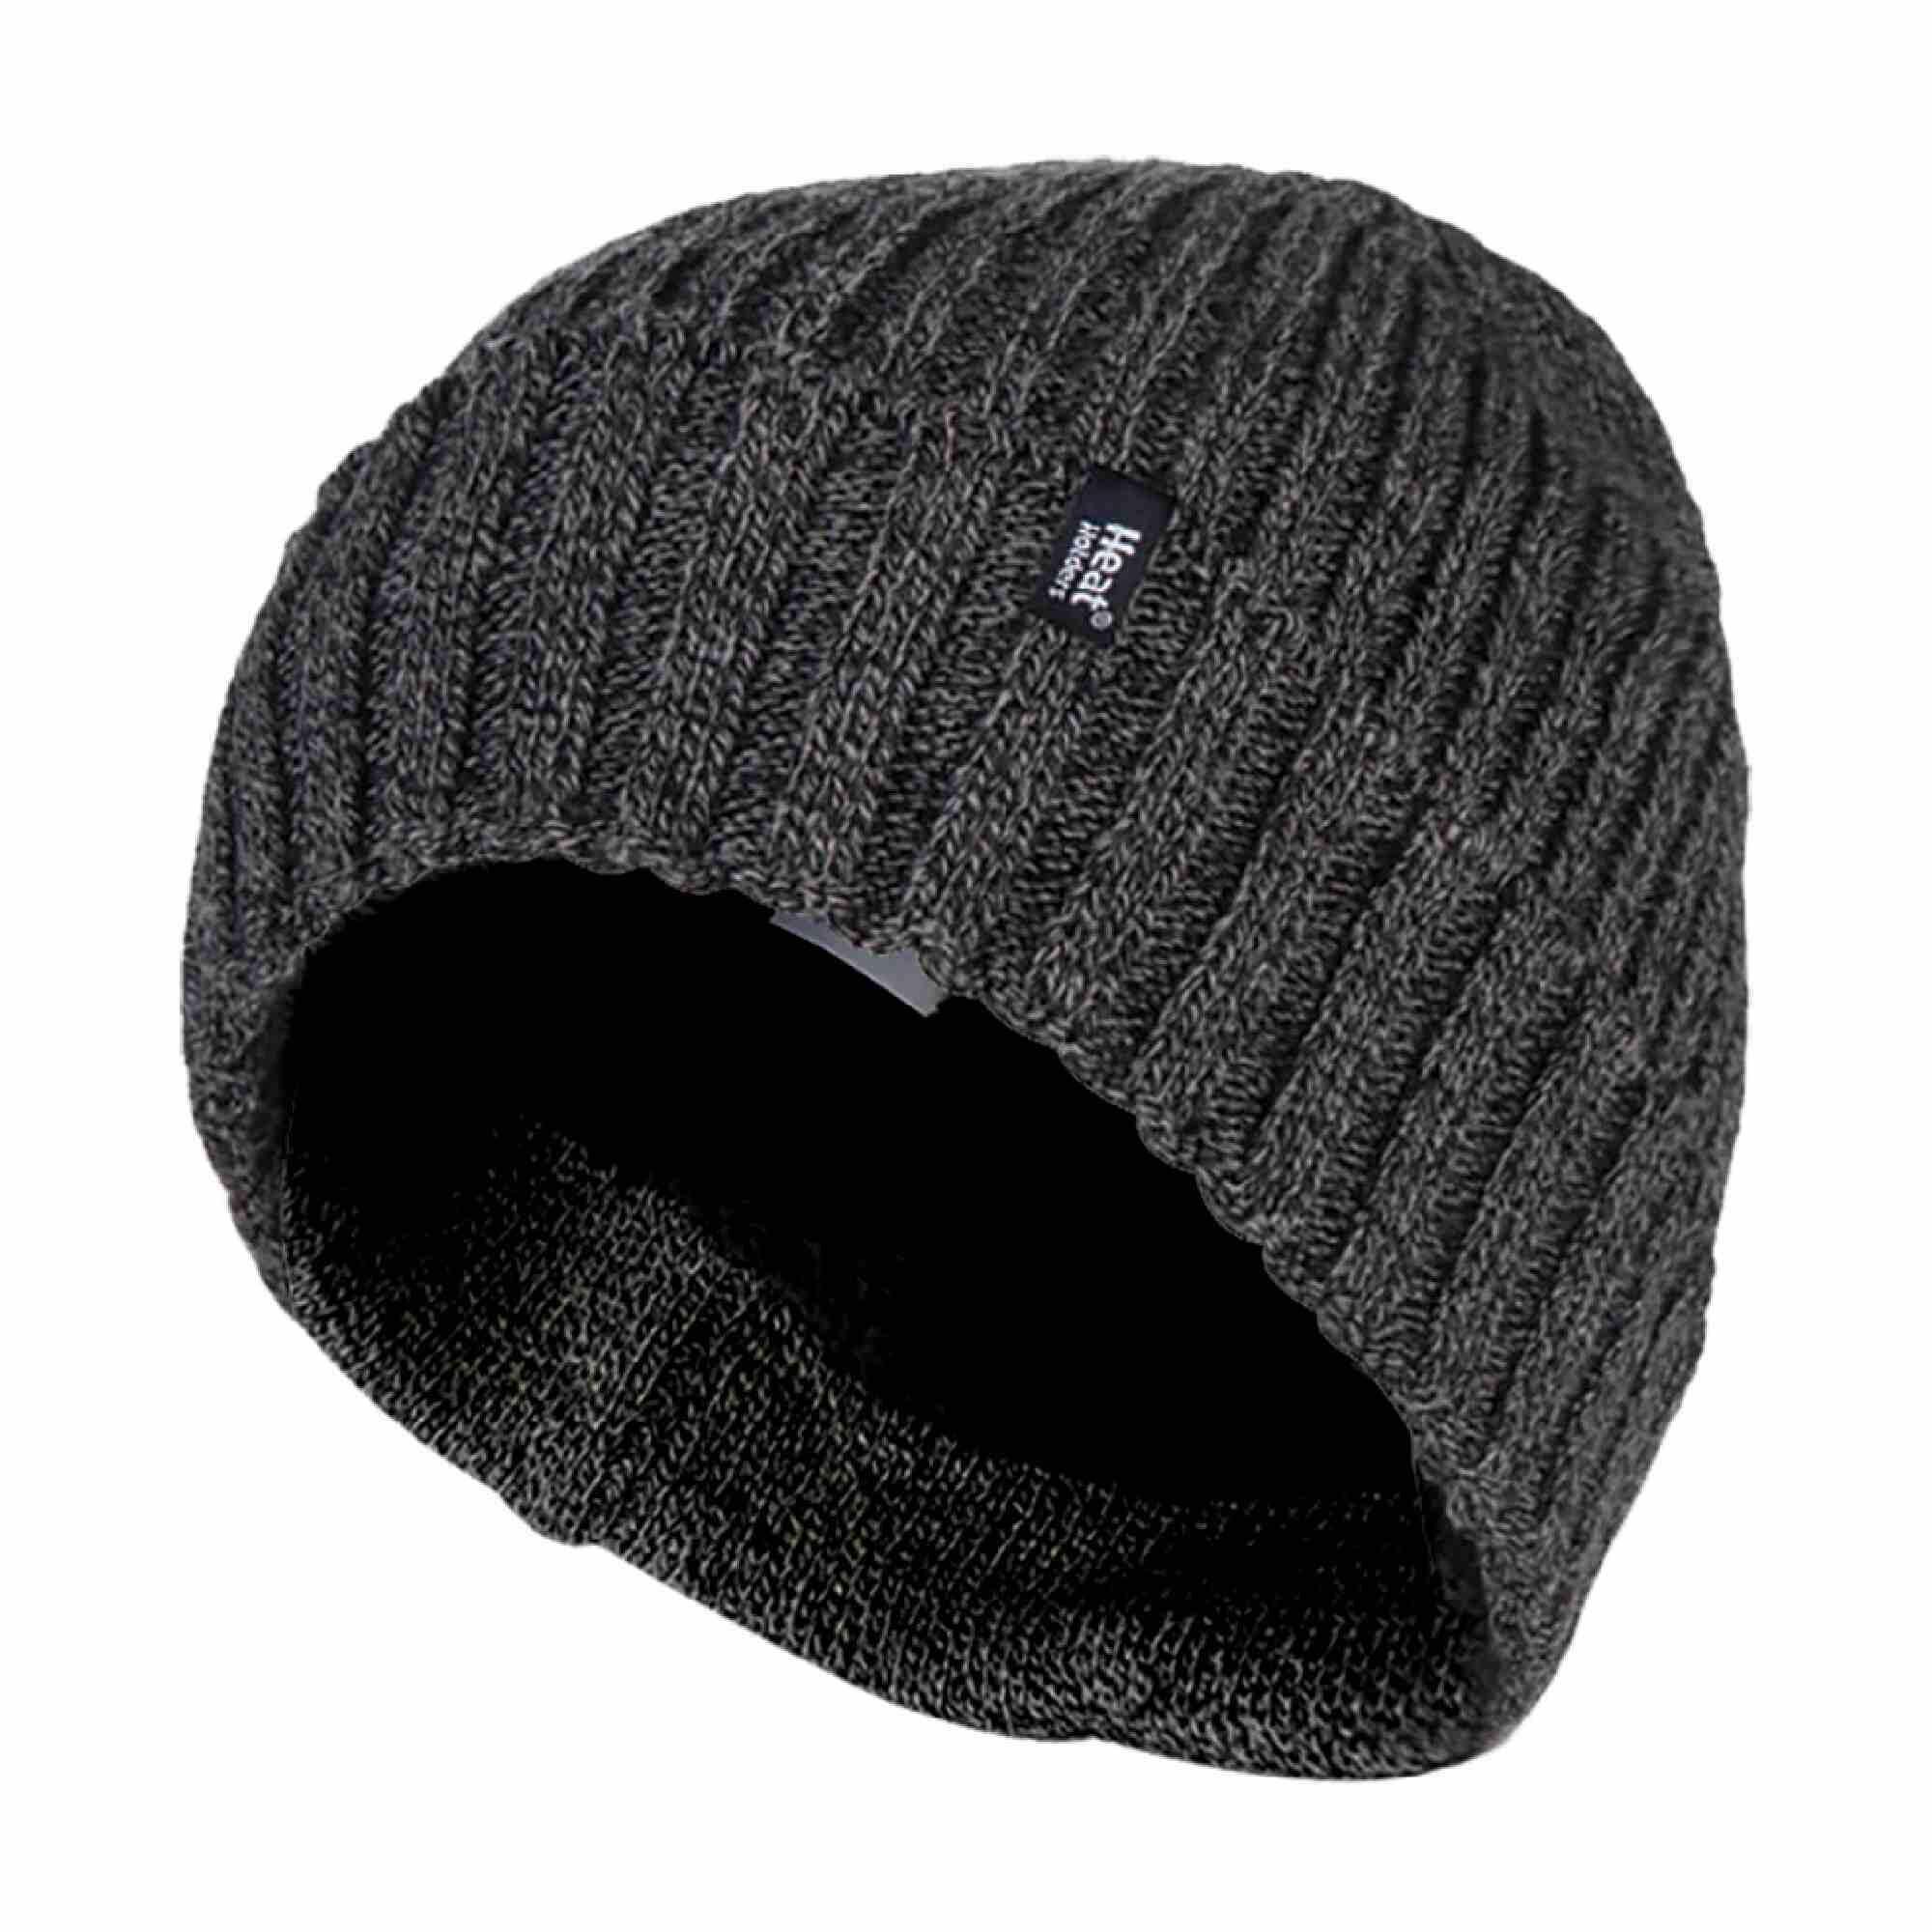 HEAT HOLDERS Mens Ribbed Knit Fleece Lined Warm Turn Over Cuff Thermal Beanie Hat